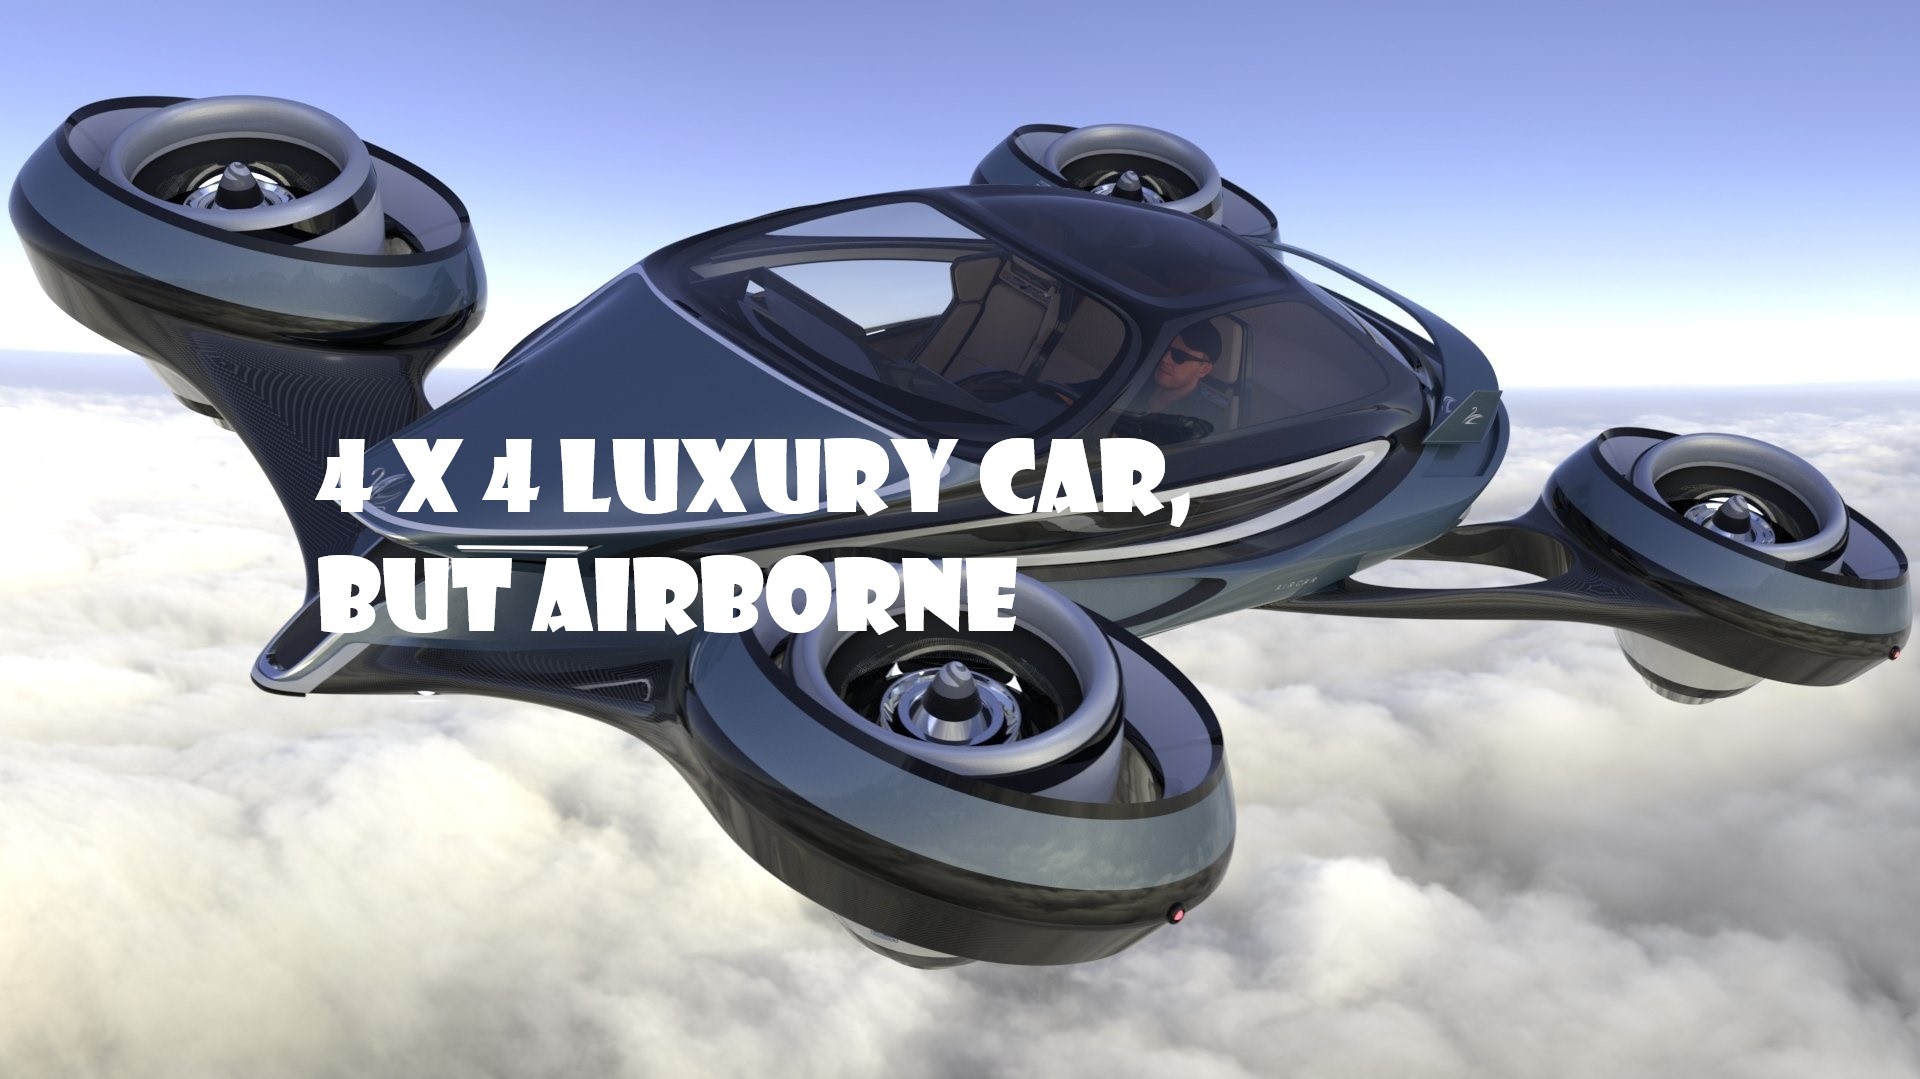 https://s1.cdn.autoevolution.com/images/news/gallery/the-aircar-is-a-luxury-flying-car-all-carbon-fiber-and-self-adjusting-jet-engines_1.jpg